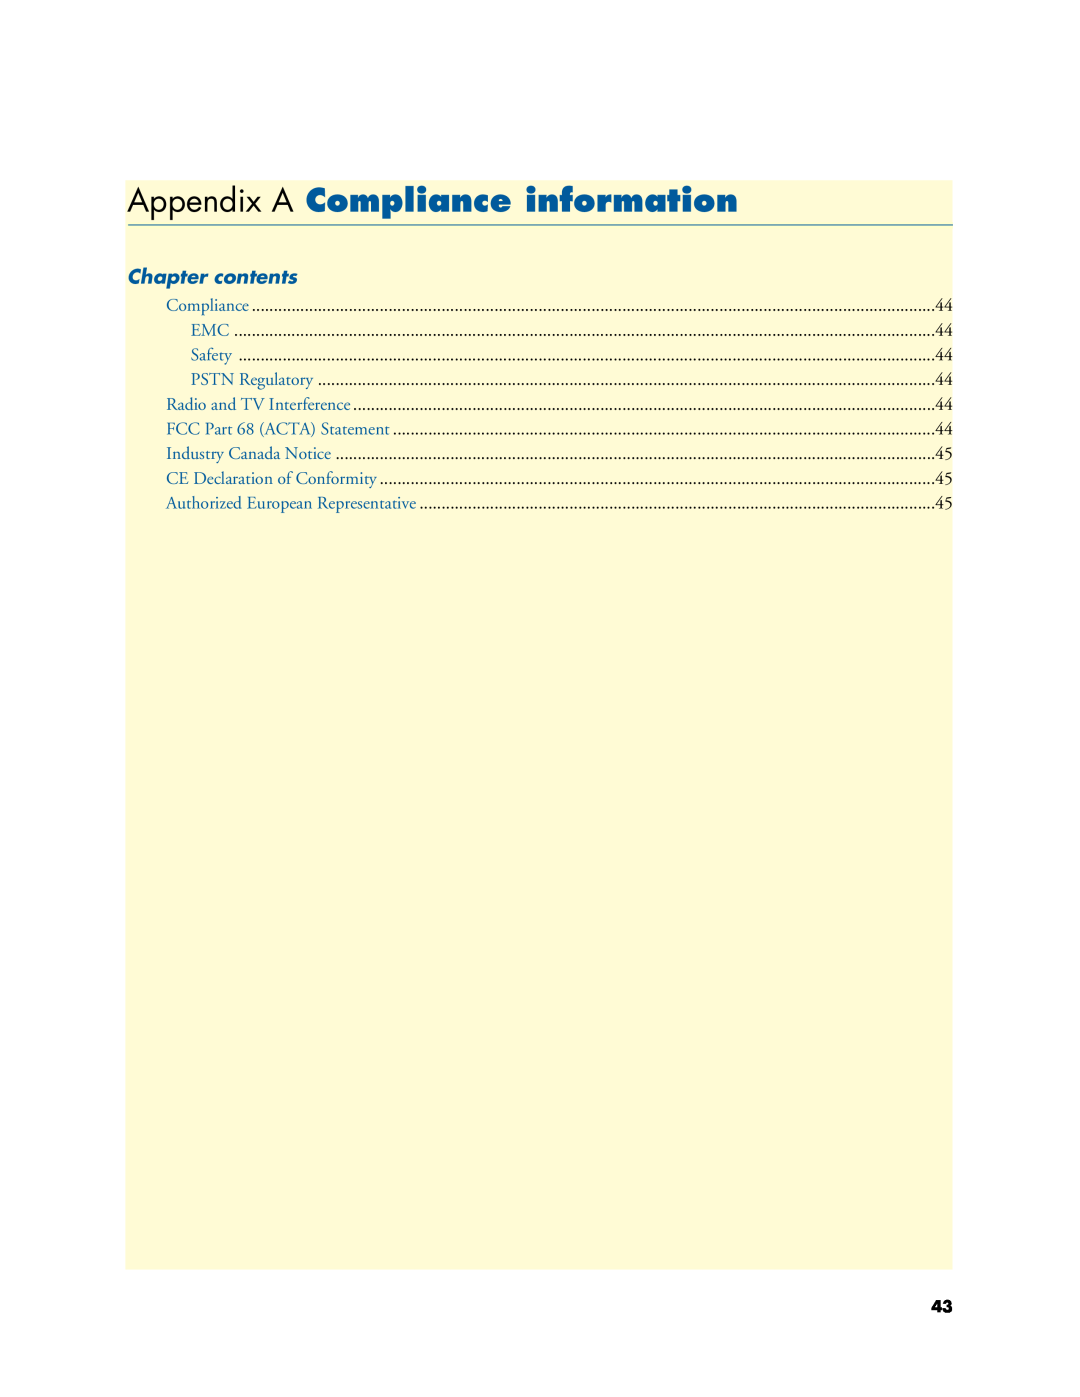 Patton electronic 3034/3038 manual Appendix A Compliance information, Chapter contents 